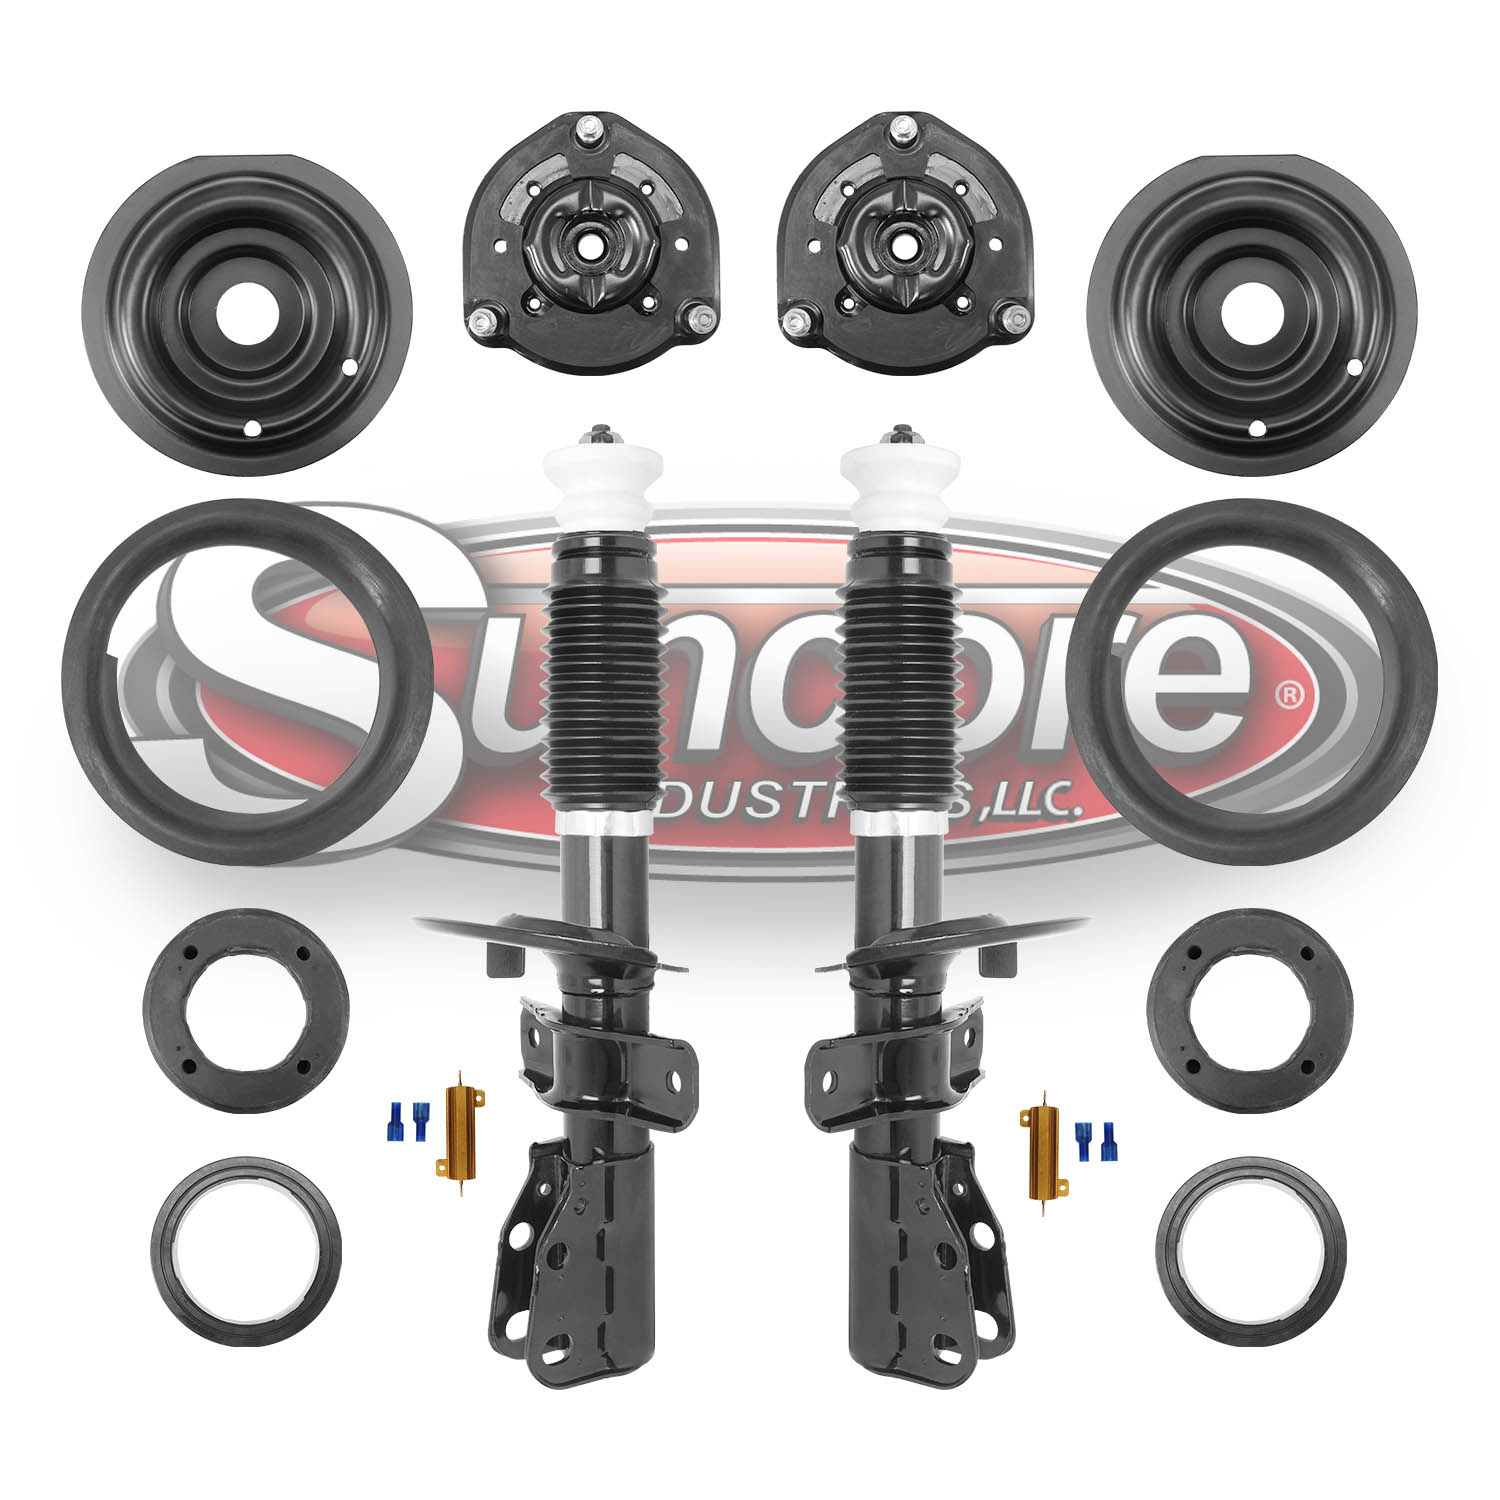 Front Electronic Suspension to Bare Struts Conversion Kit